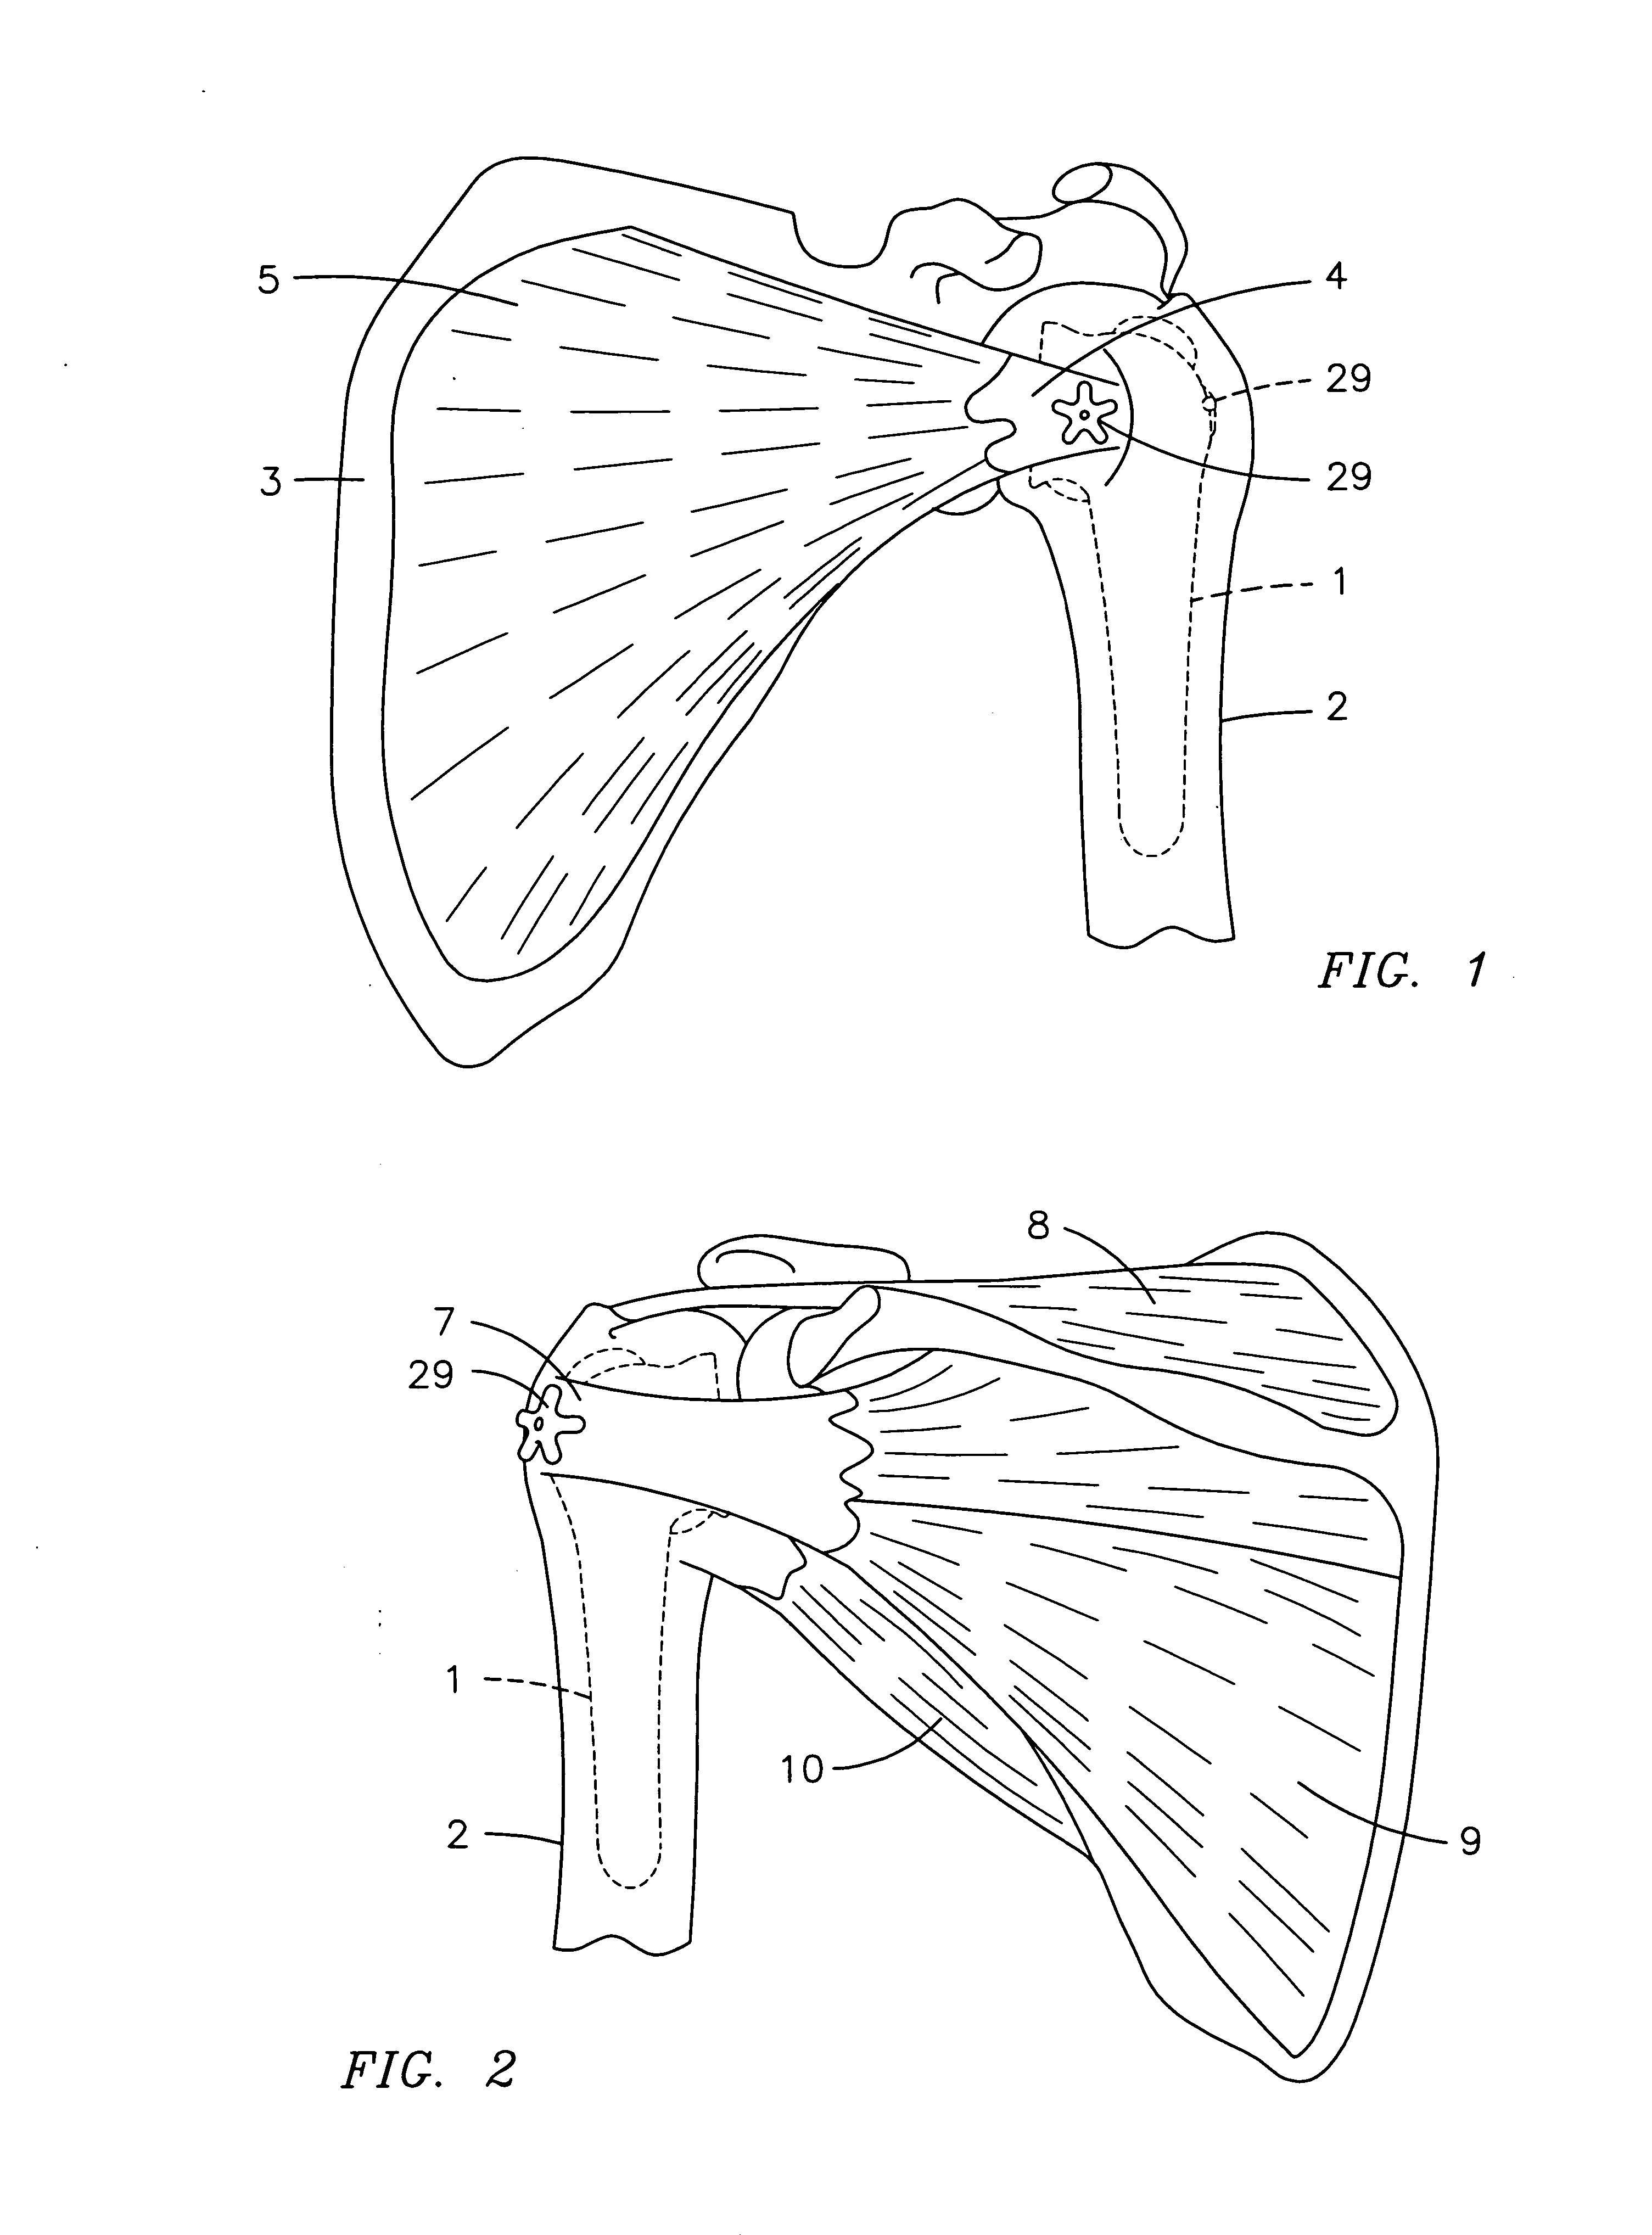 Prosthetic humeral device and method